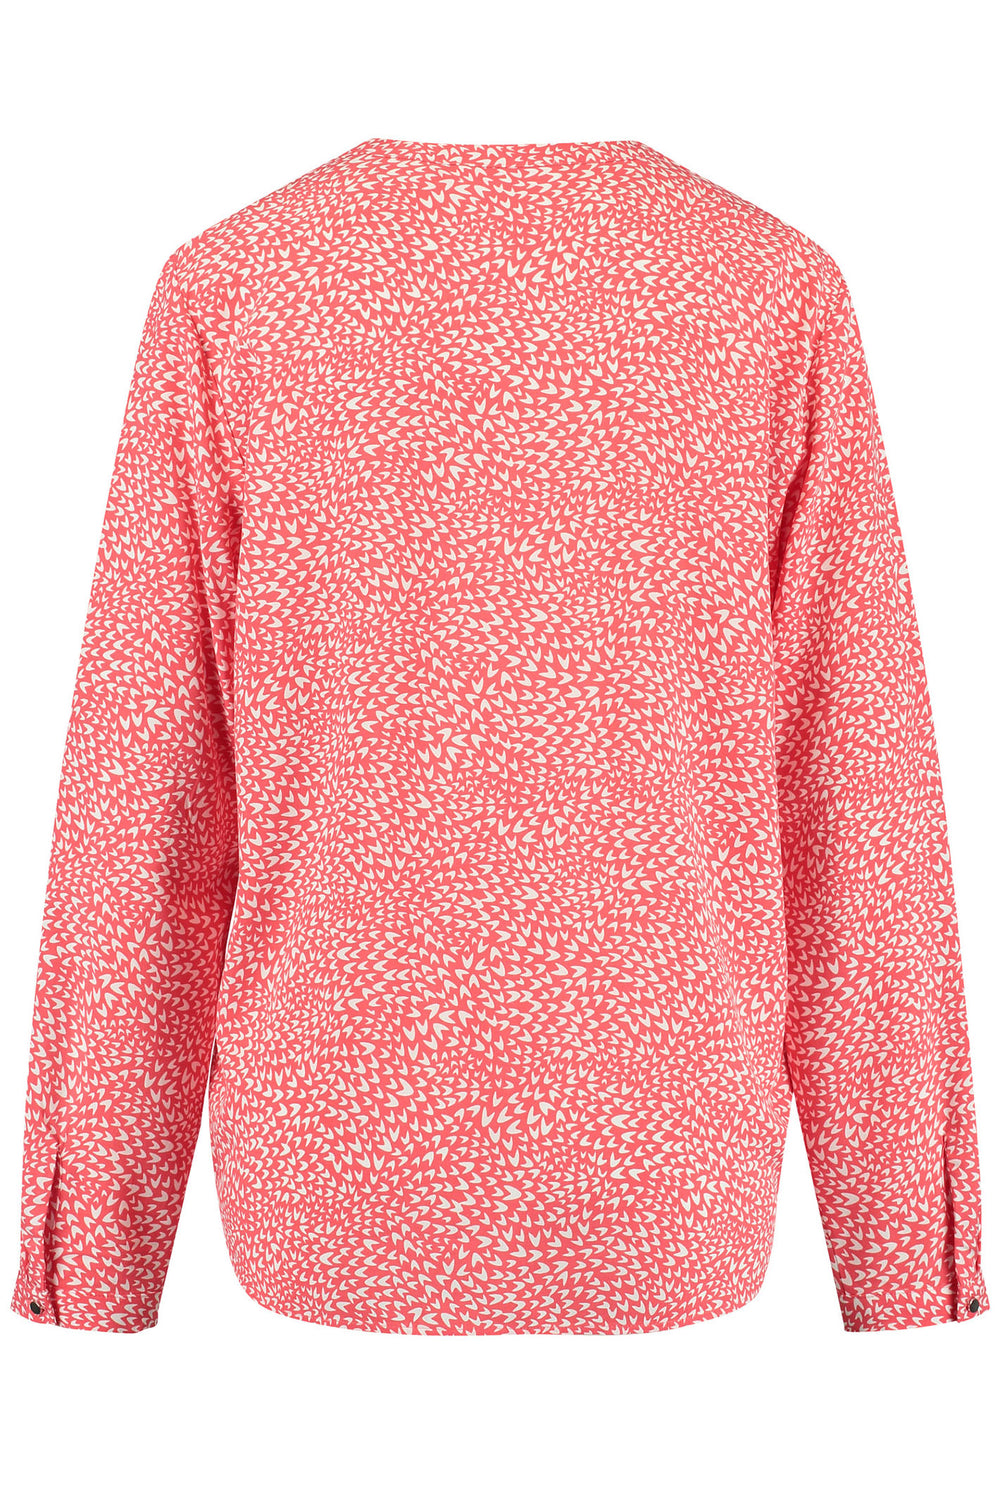 Gerry Weber 965046-66407 Red Coral Print Split Neck Blouse - Dotique Chesterfield